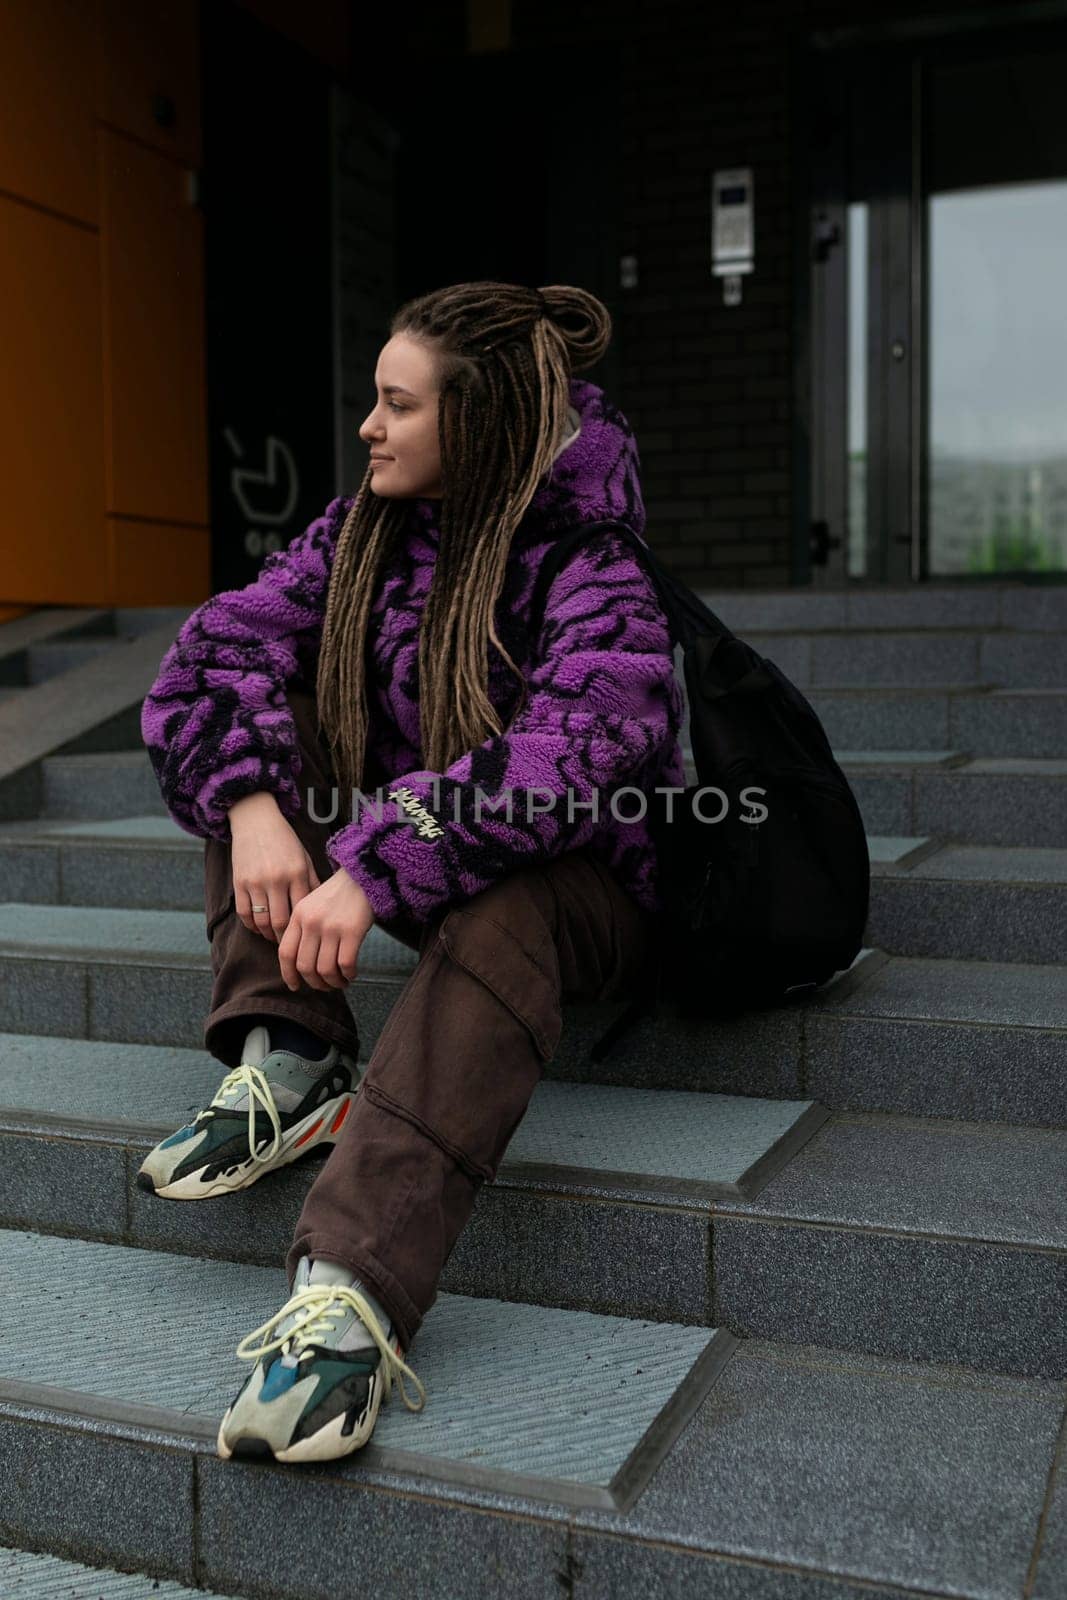 Beautiful young woman with dreadlocks and piercings walks through the city by TRMK